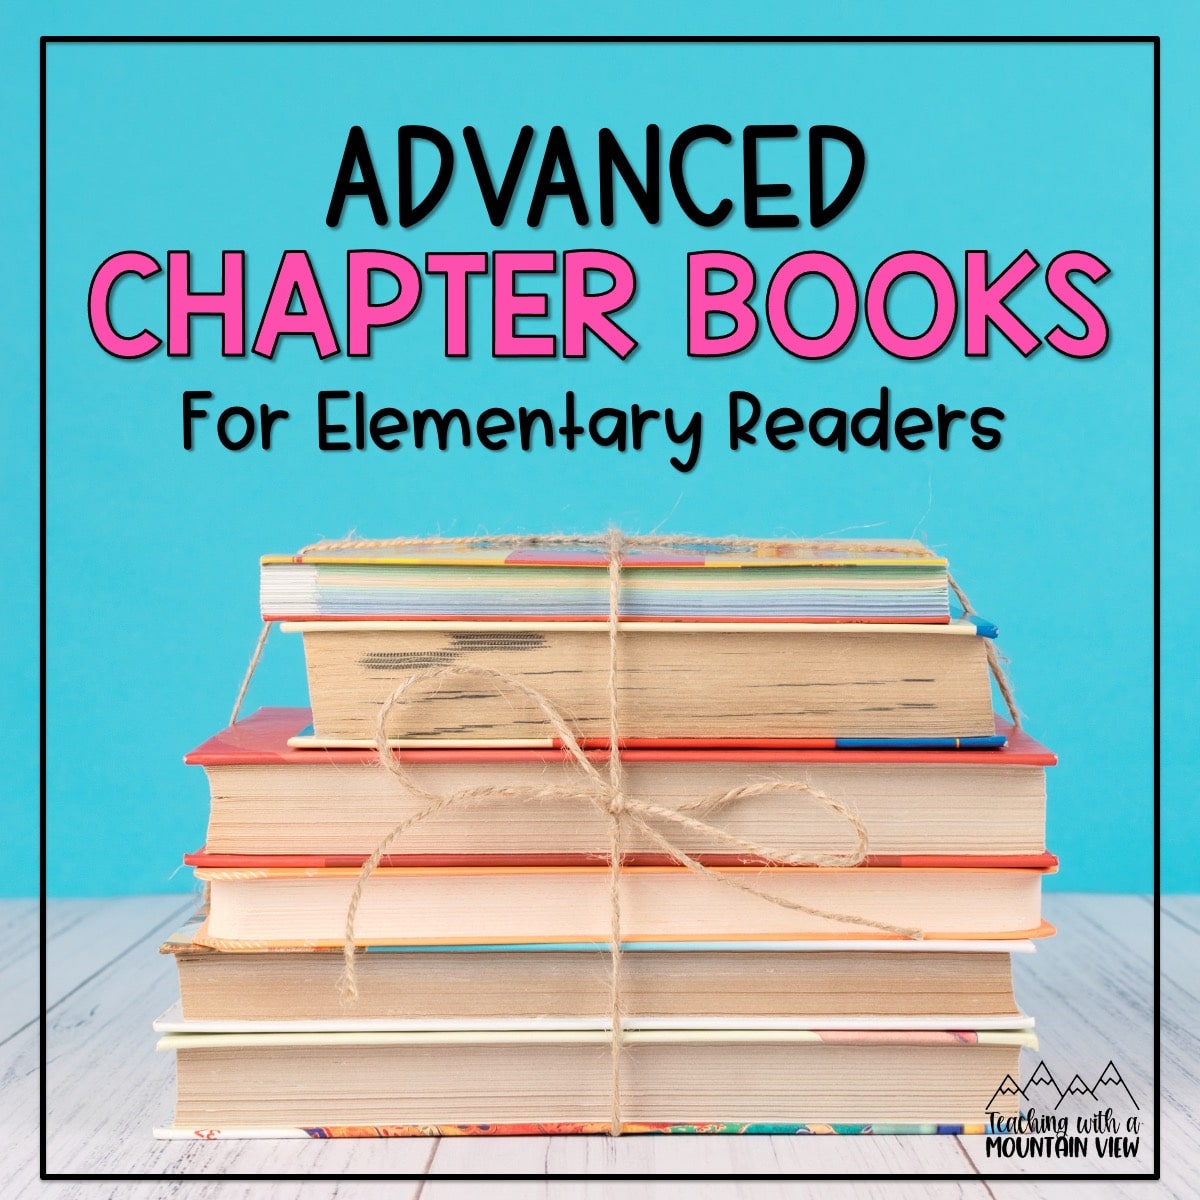 Advanced chapter books for higher-level readers in second through fourth grade. Each of these books vary in topic to reach more interests.